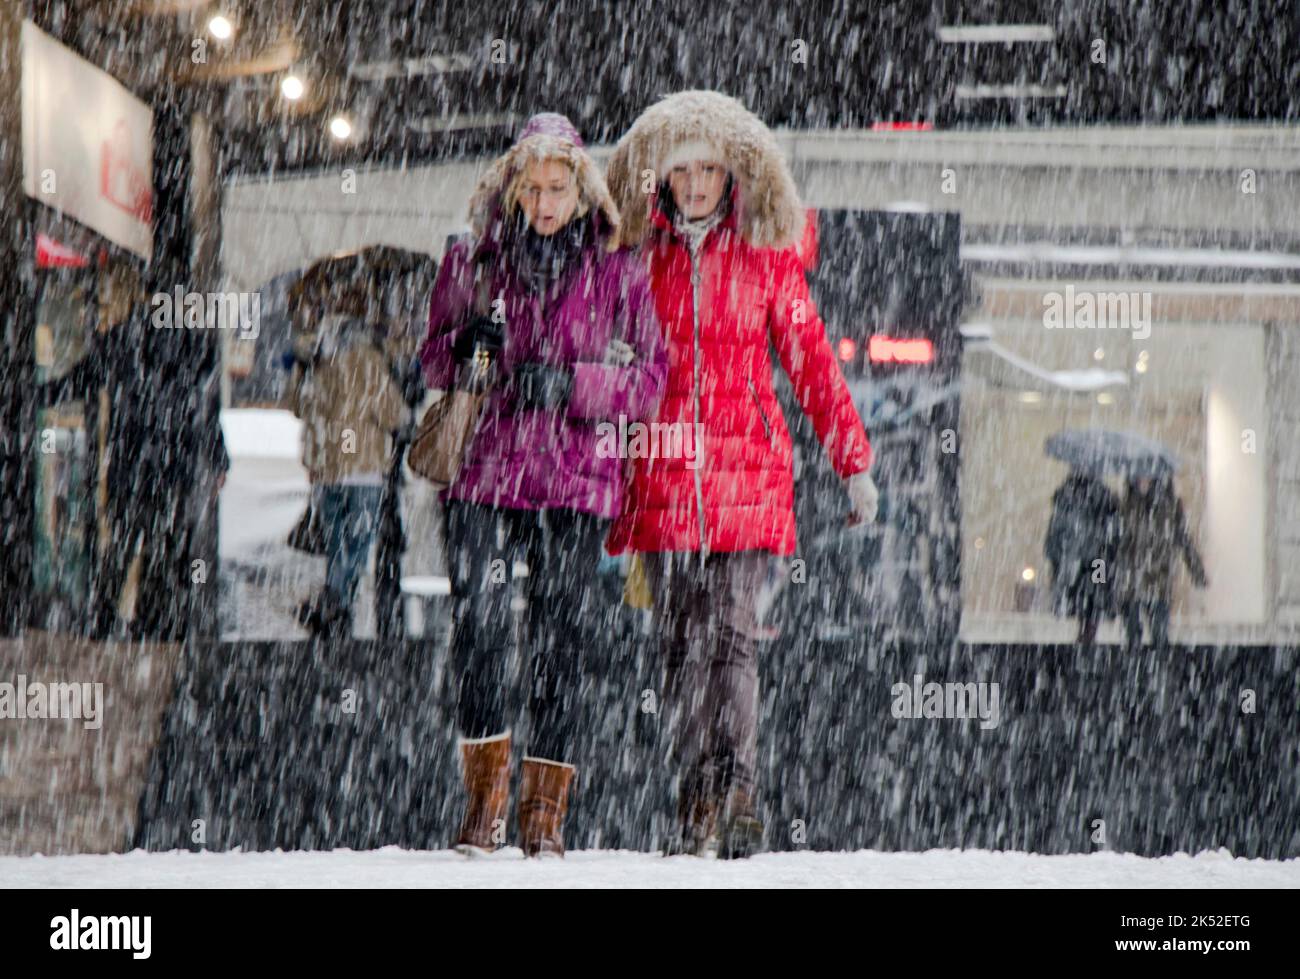 Belgrade, Serbia - December 15, 2018: Two young women walking city street on a snowy day Stock Photo